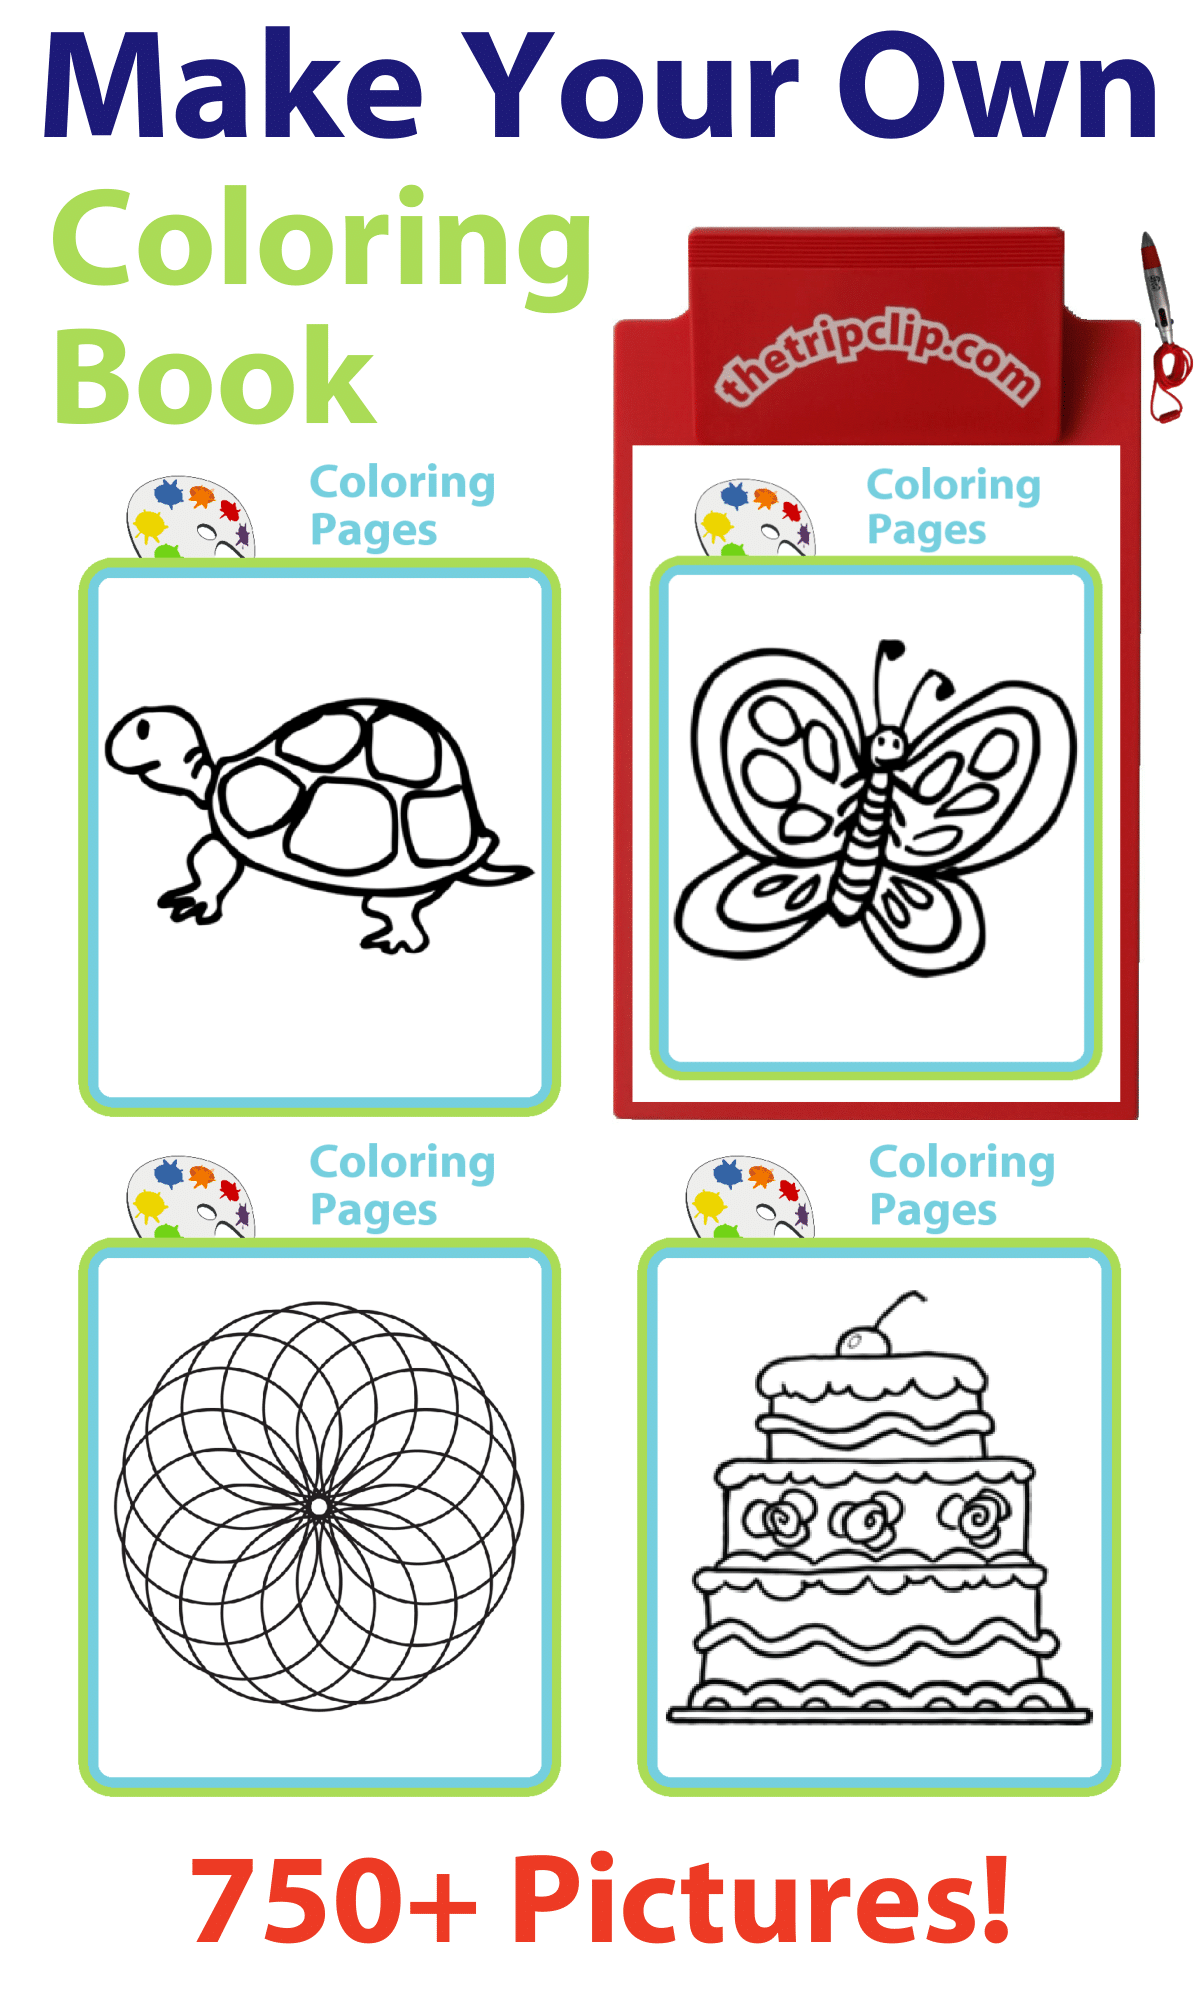 750+ Coloring pages for kids, including butterfly, turtle, boy in pajamas, cake, spiral, and kite